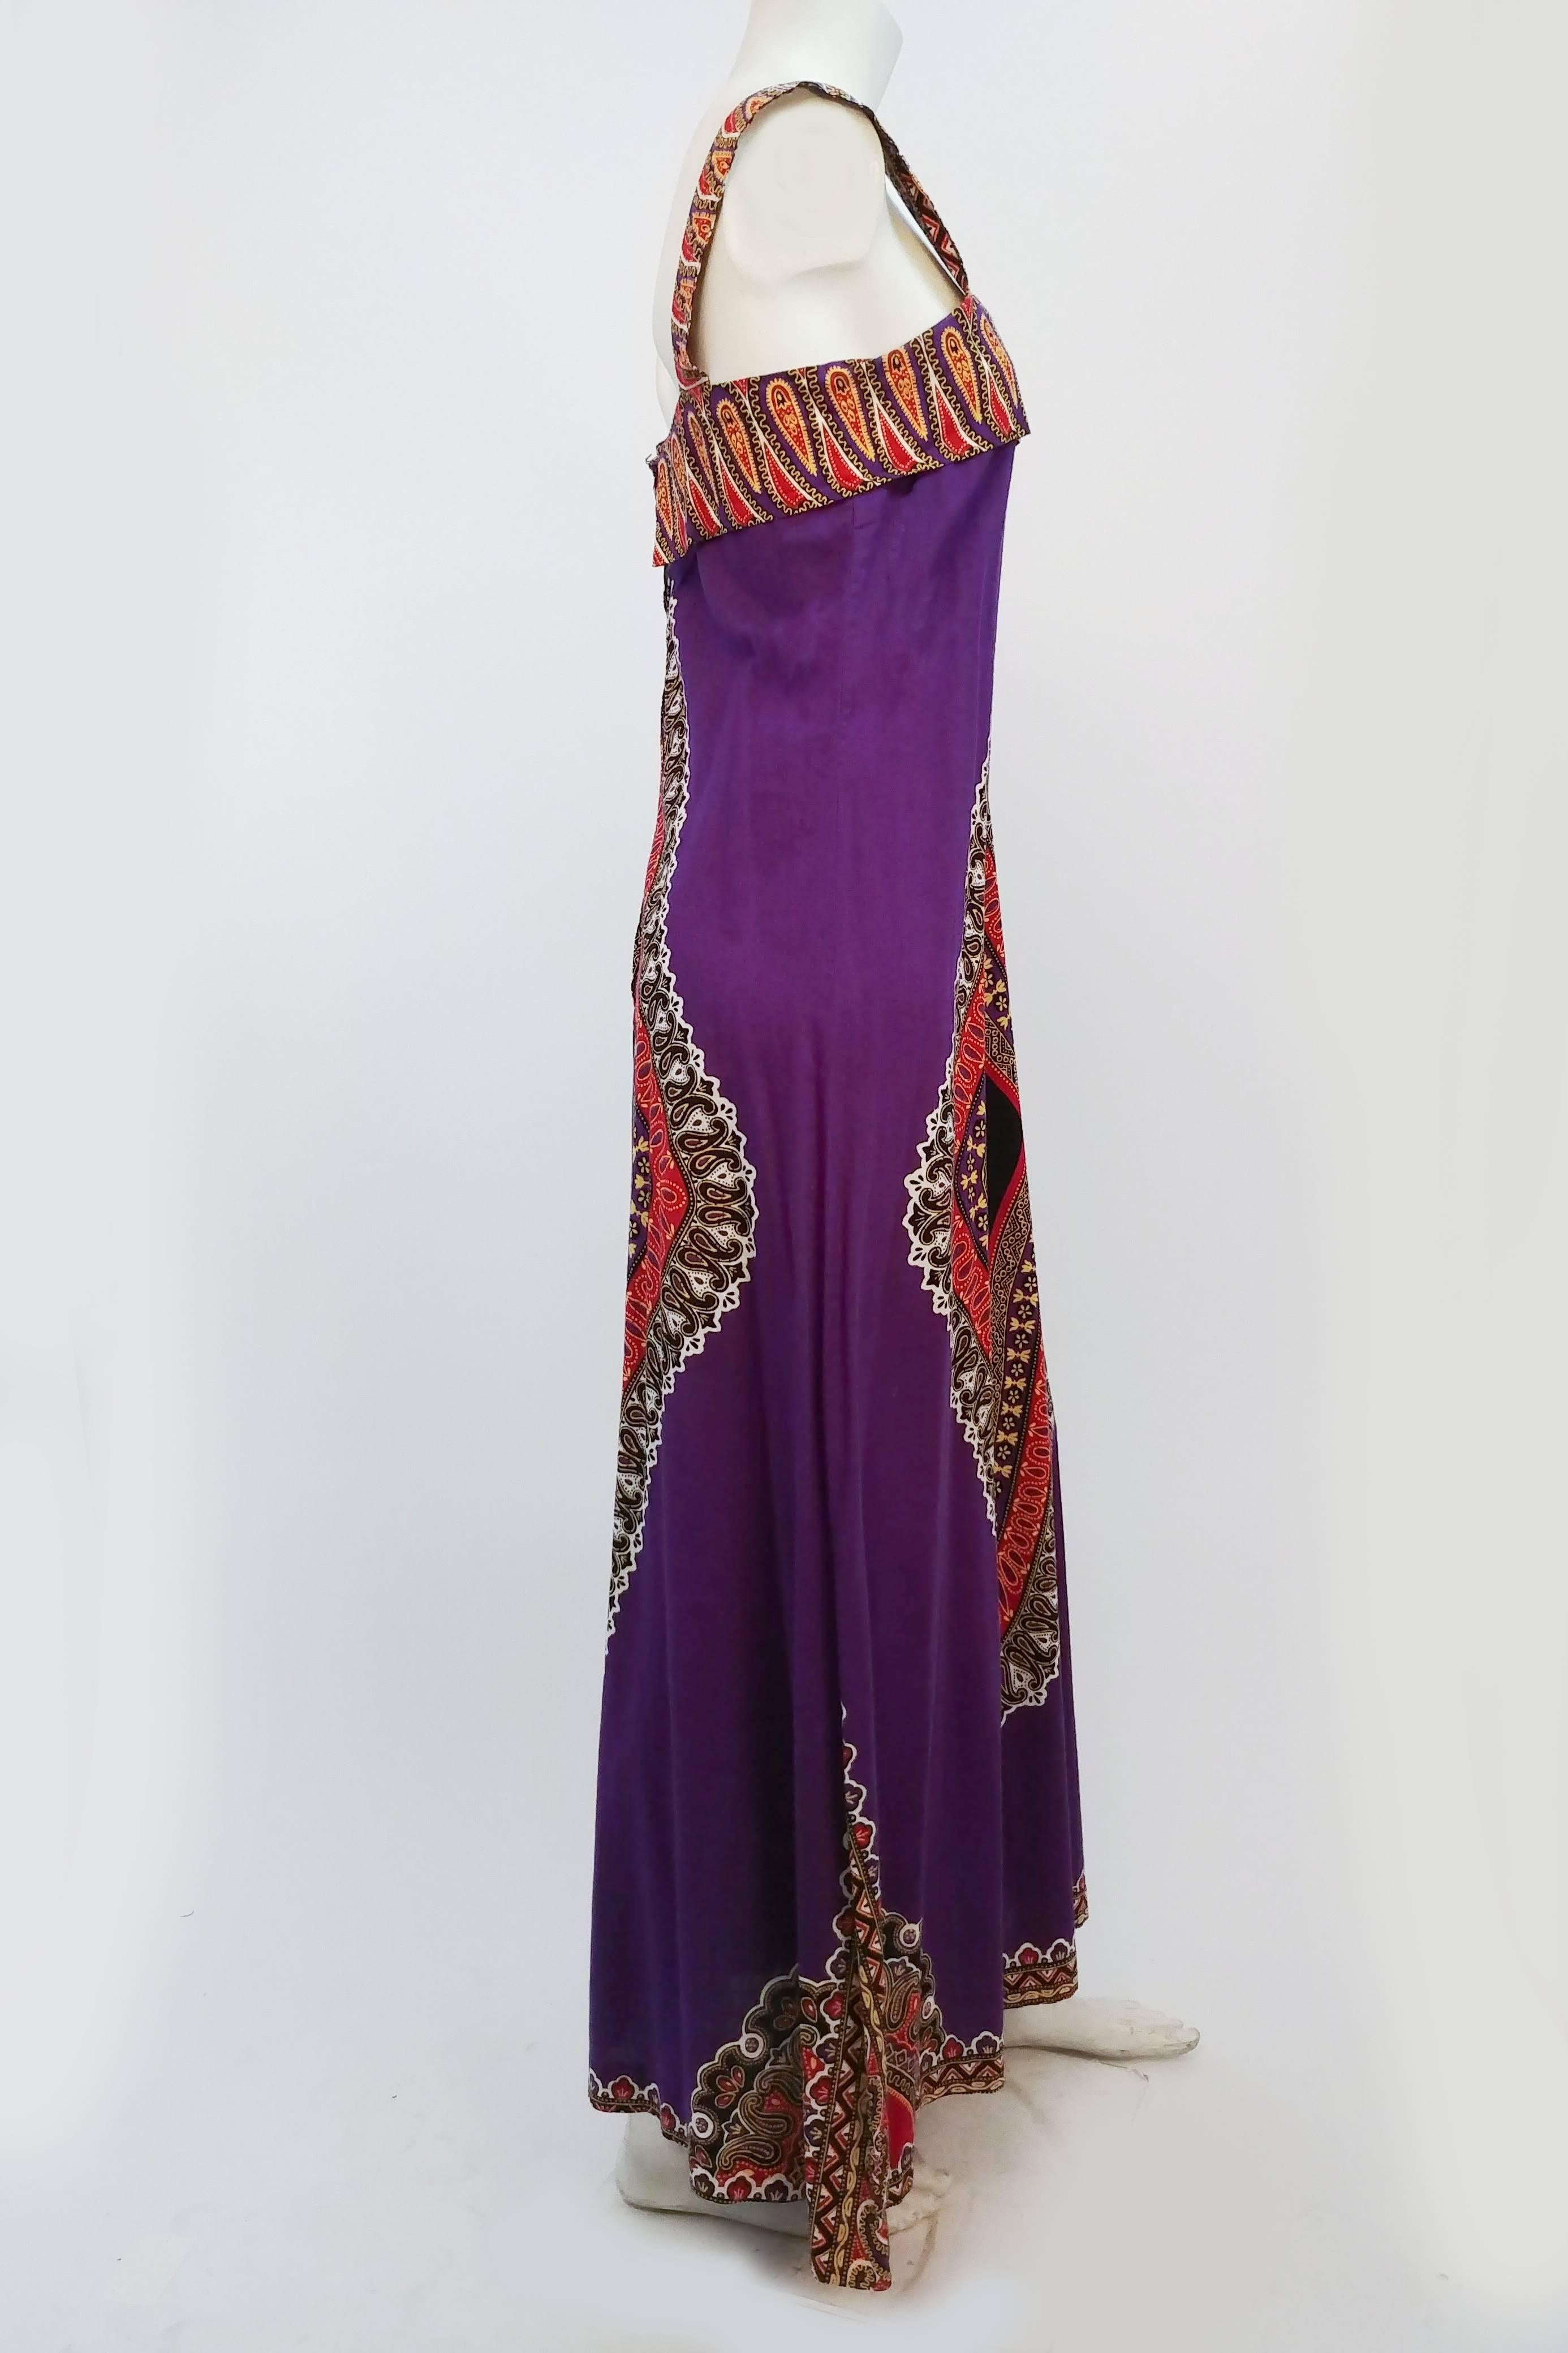 Printed Purple Hippie Maxi Cotton Dress, 1960s. Printed boho cotton dress, wide straps, slightly flared A-line silhouette. Zips up back with metal zipper.  